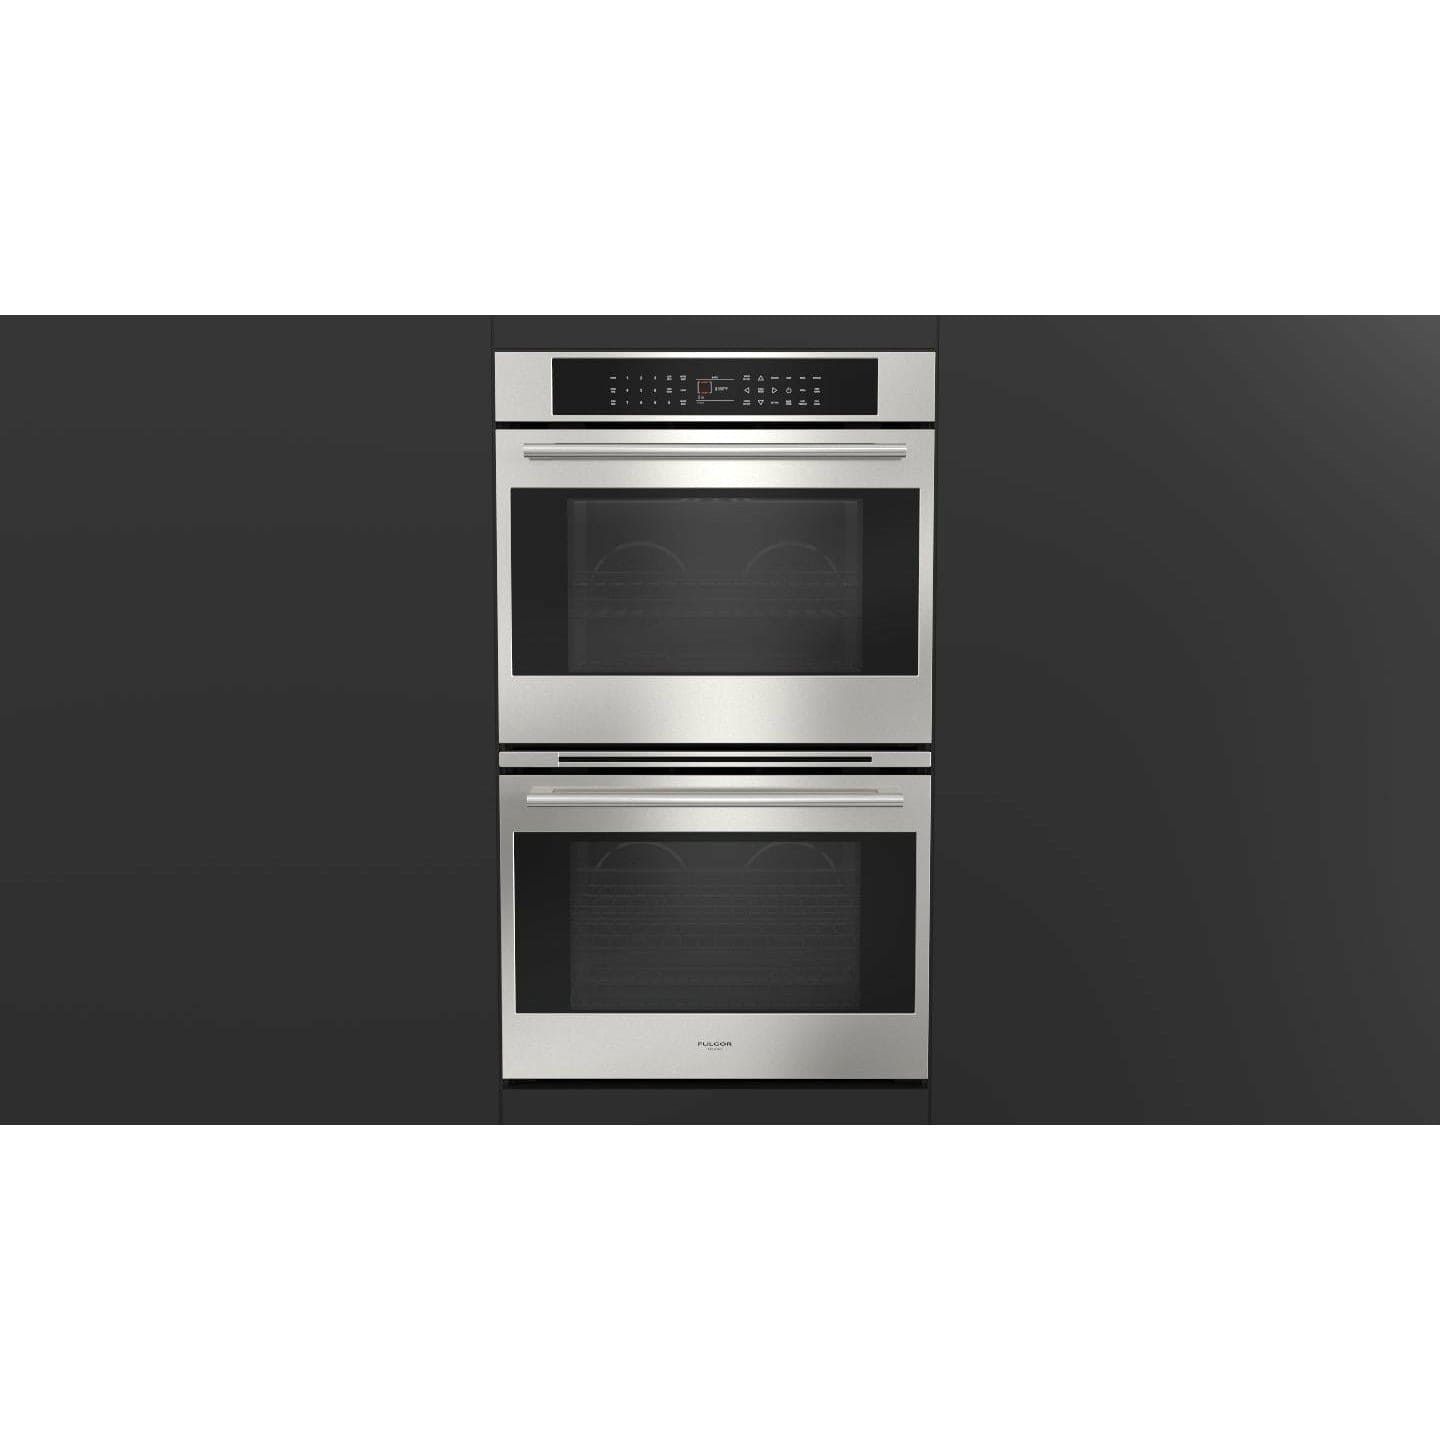 Fulgor Milano 30" Electric Double Wall Oven with 4.4 cu. ft. Capacity - F7DP301 Wall Oven F7DP30S1 Luxury Appliances Direct